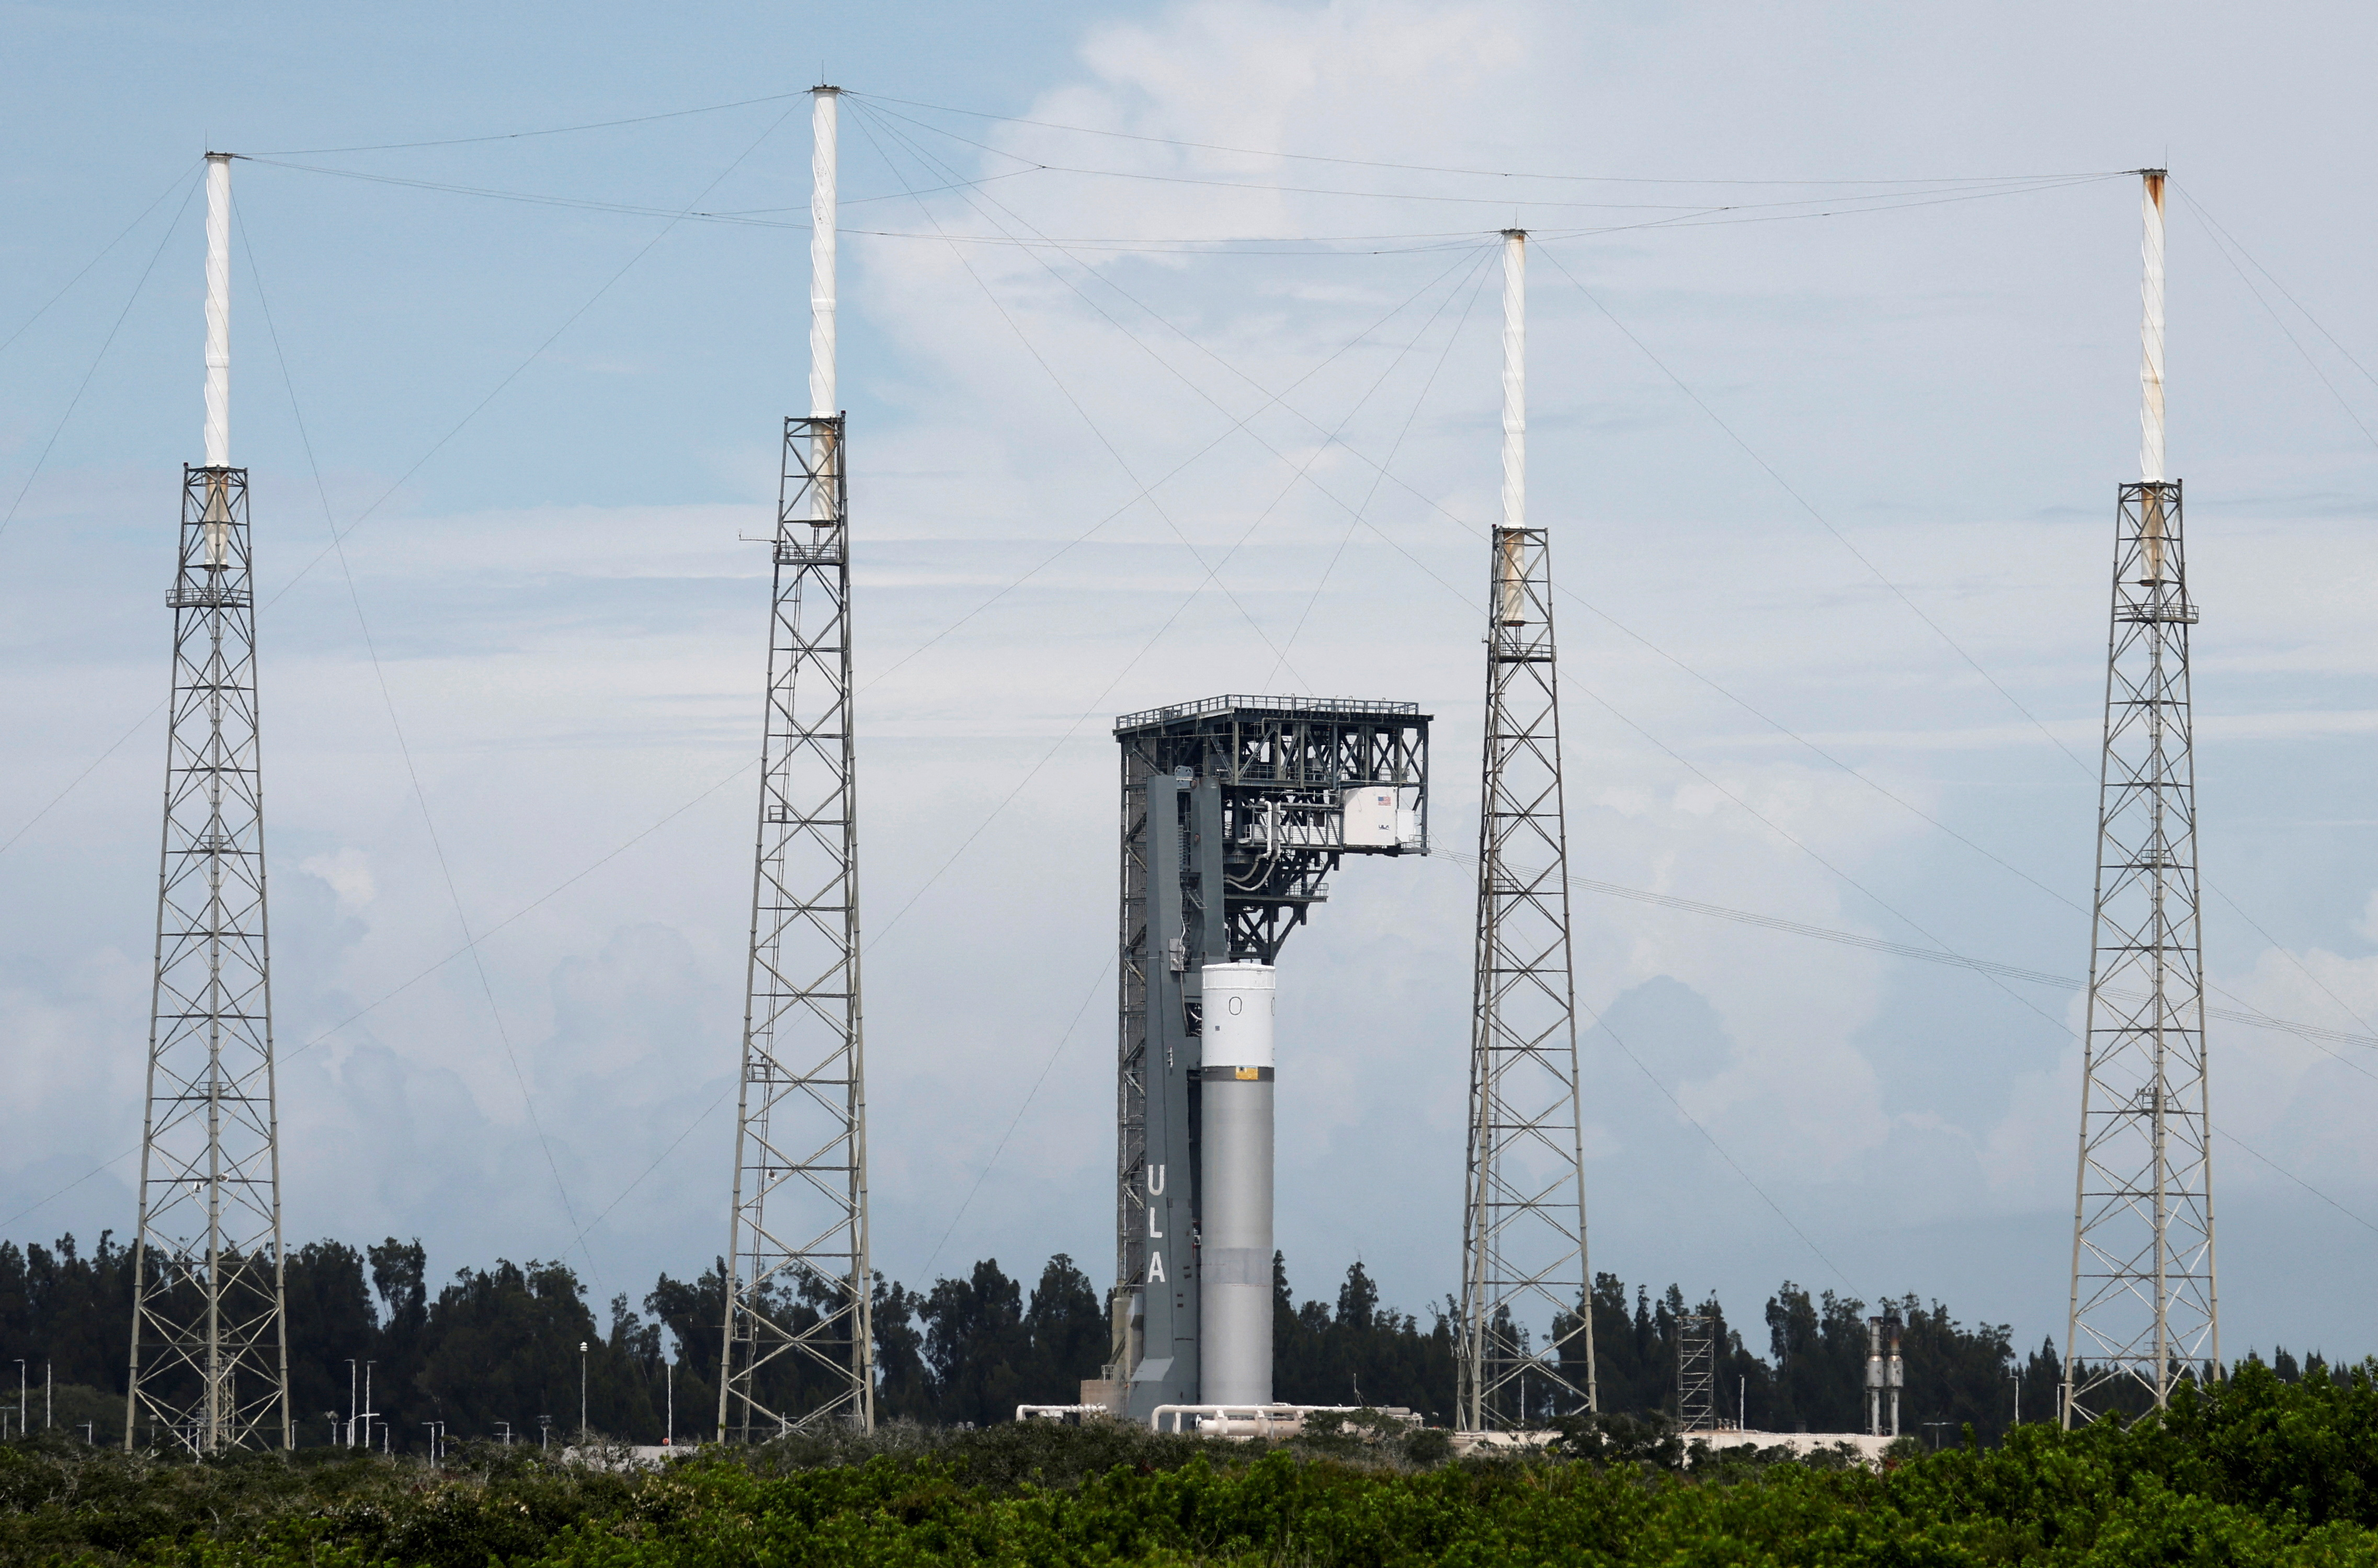 A United Launch Alliance Vulcan Pathfinder first stage is shown on Pad 41 at the Cape Canaveral